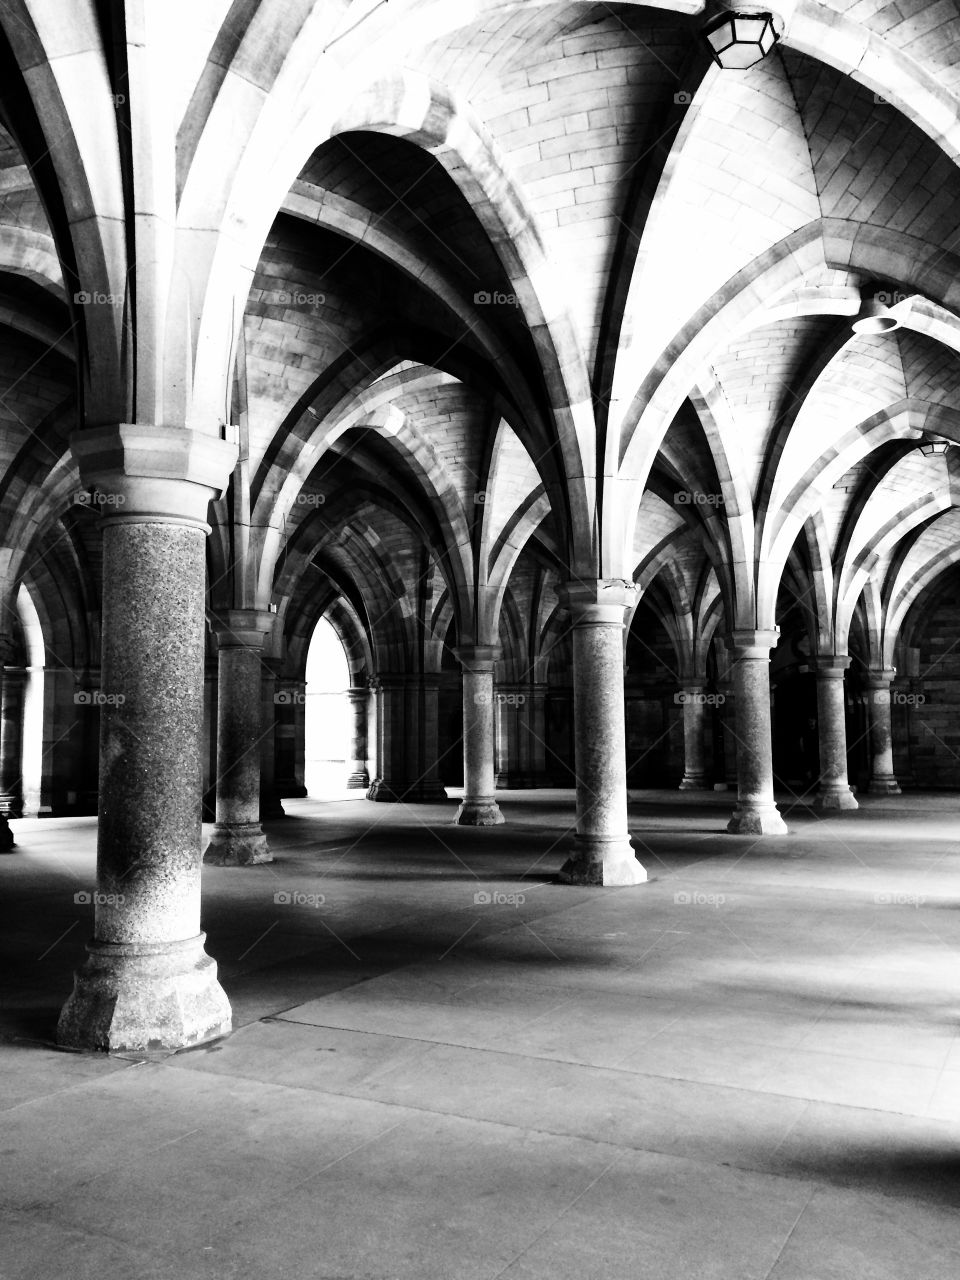 Black and white archways photography, black and white images, contrast 